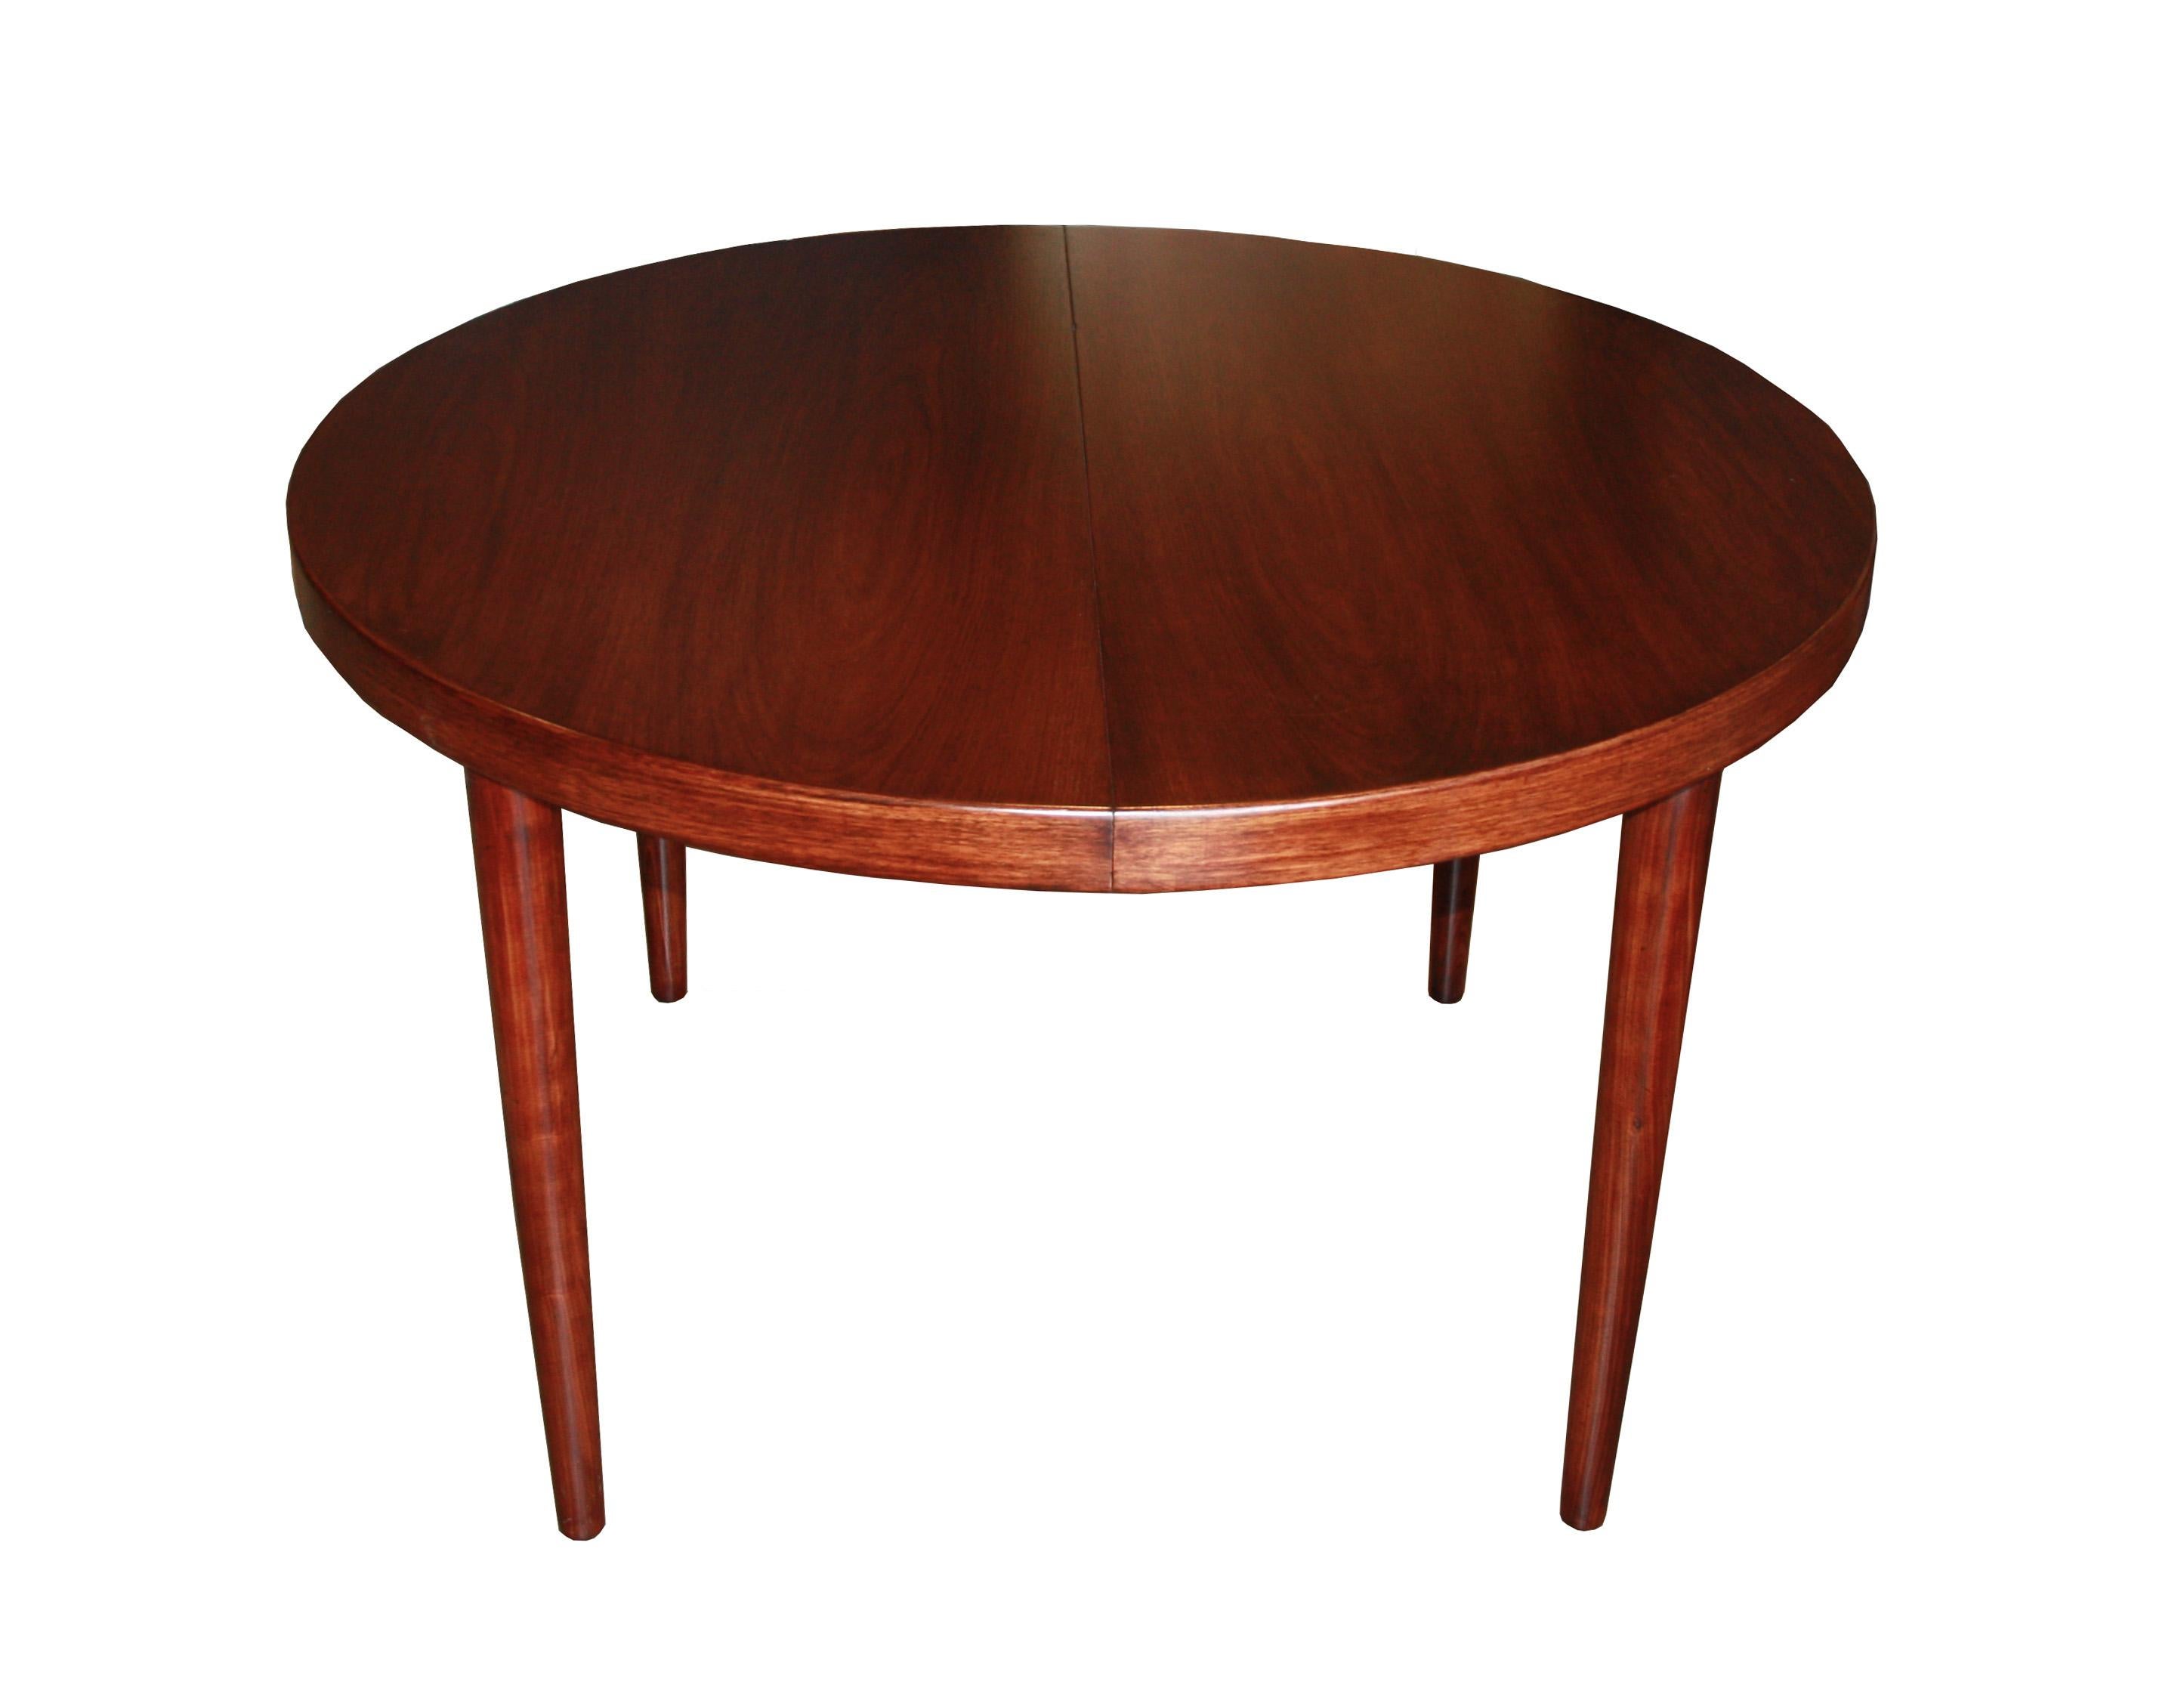 Beautiful, midcentury, round dining room table with a smooth, dark color and grain.